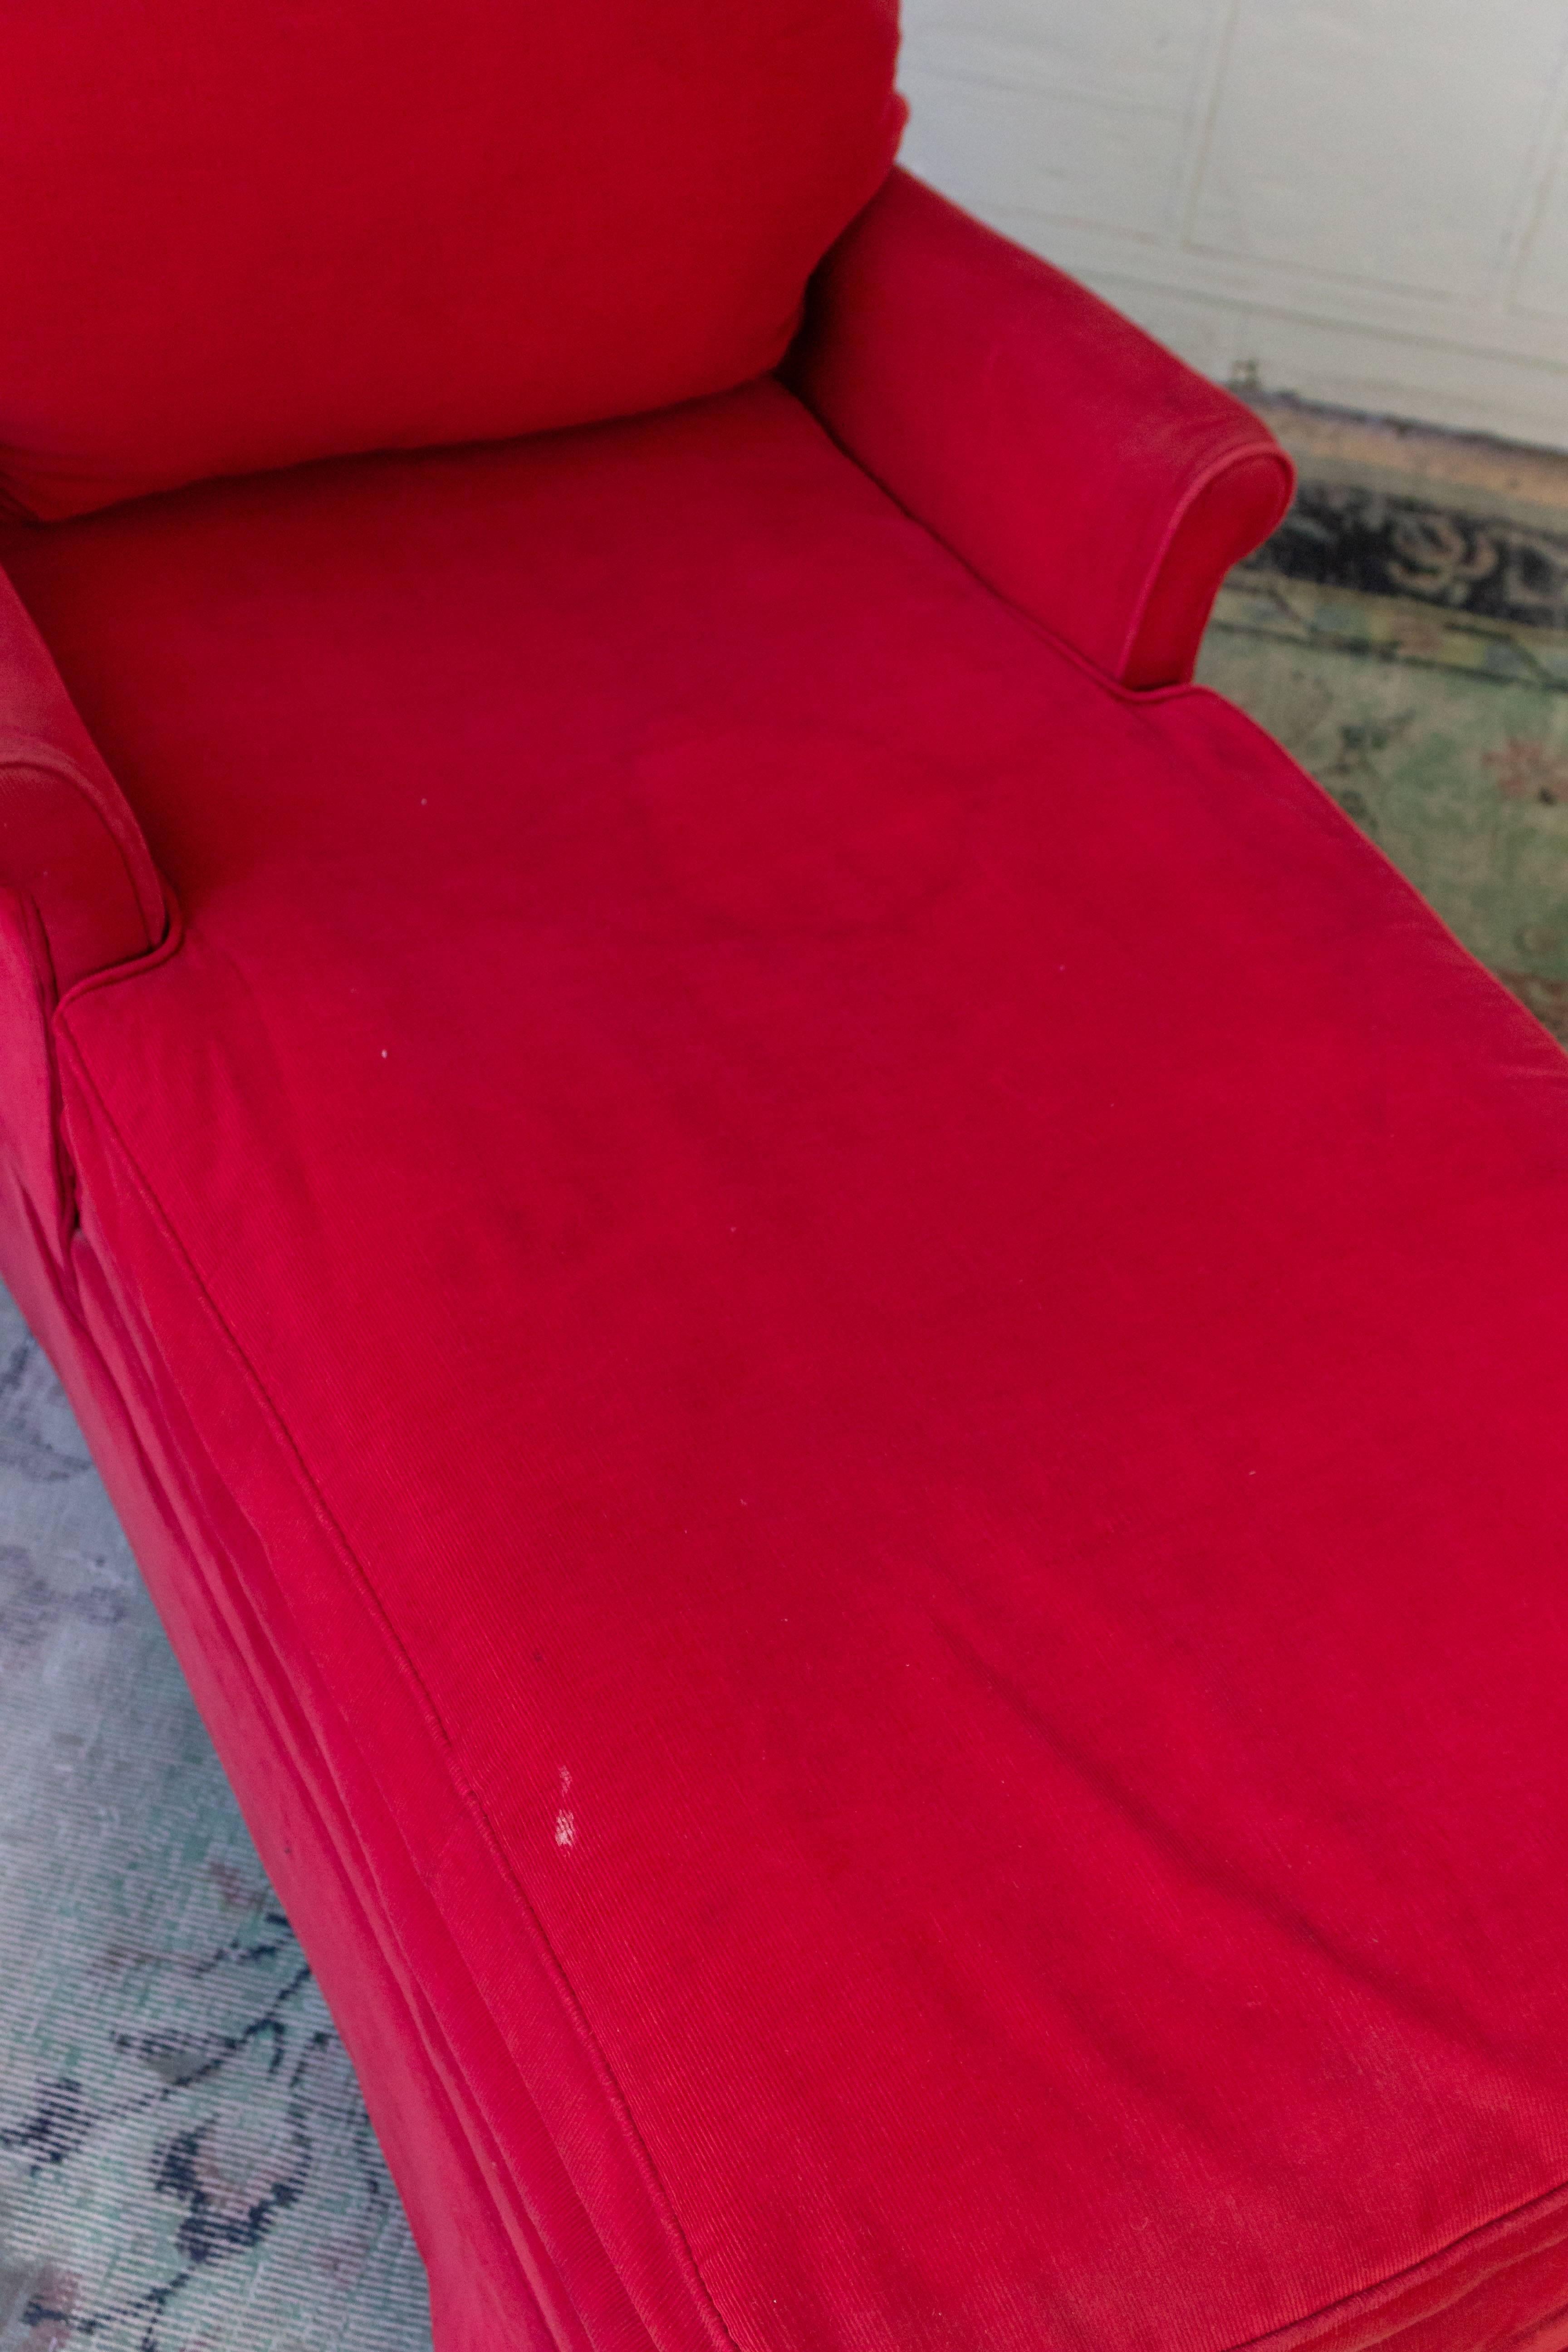 Small-scale American made chaise longue, upholstered in red corduroy.